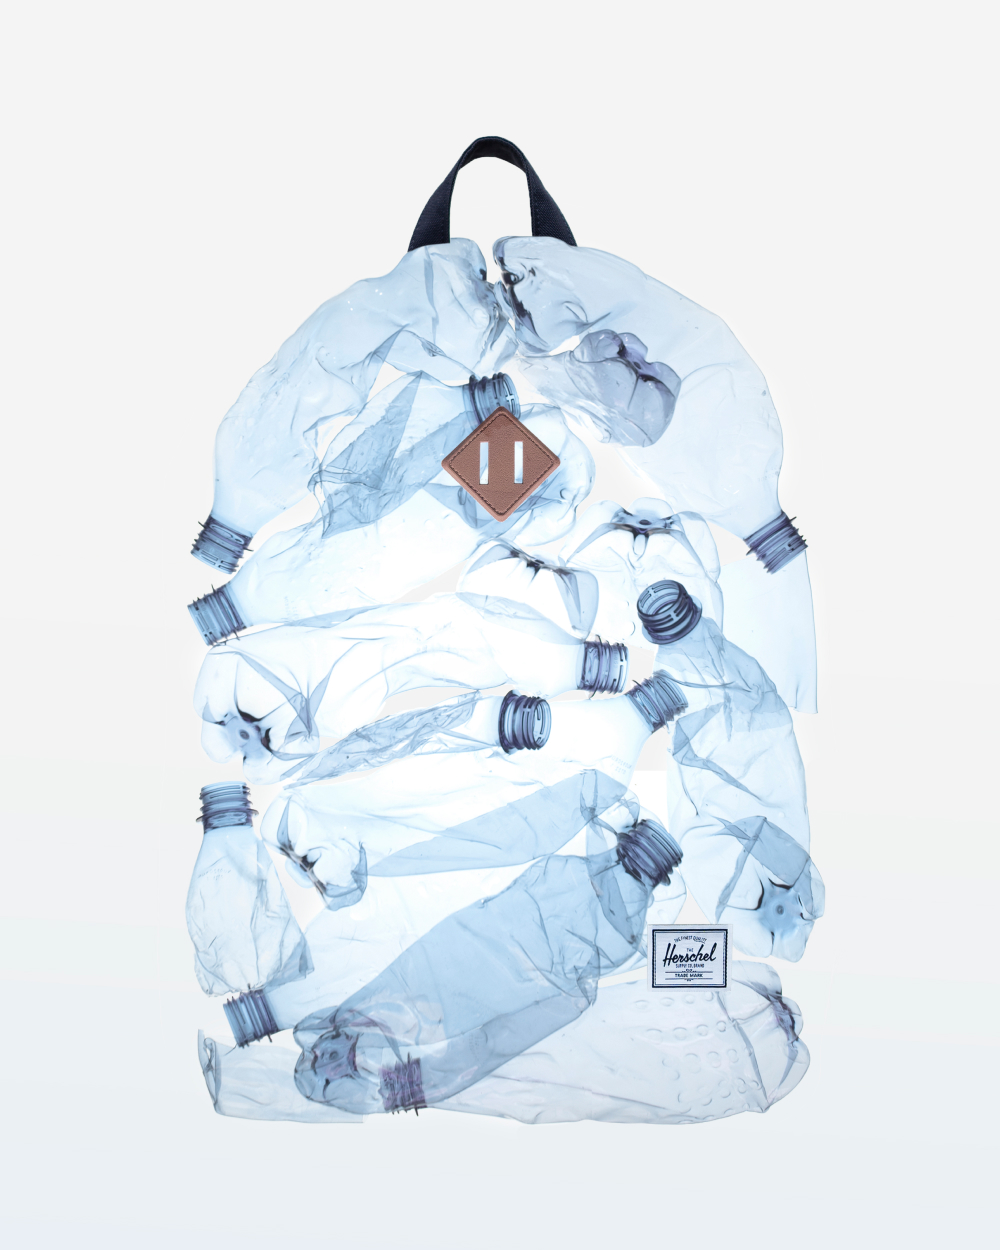 A Herschel Heritage™ Backpack silhouette made out of recycled plastic bottles.